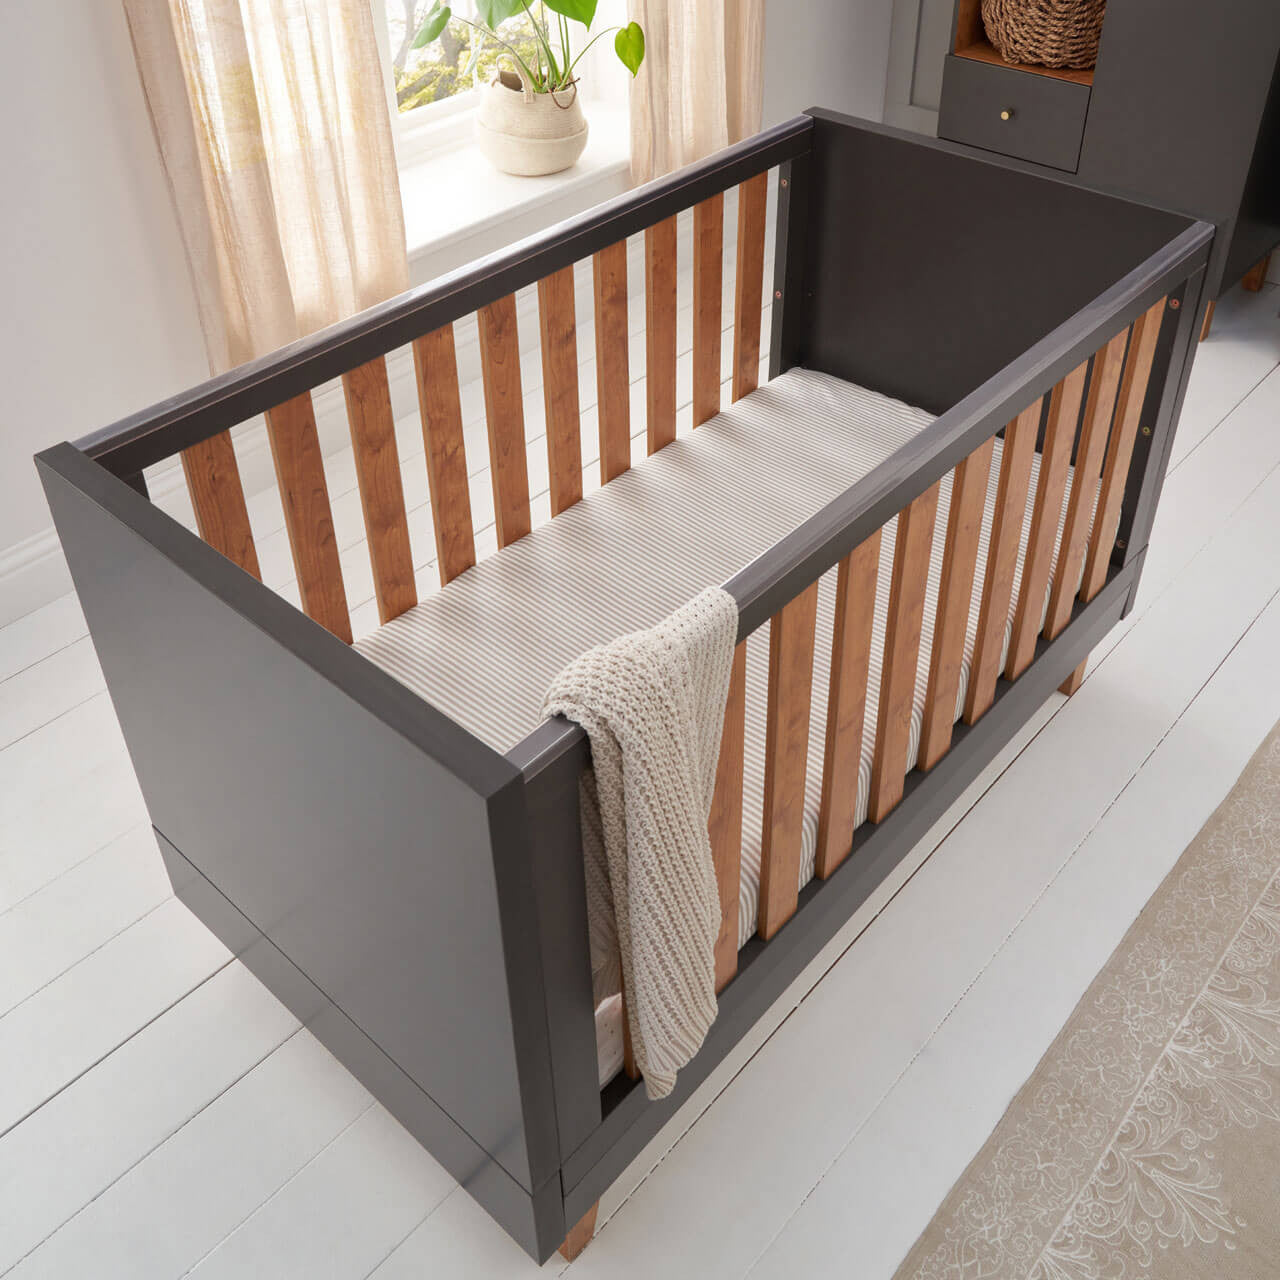 Tutti Bambini Como Cot Bed - Slate Grey / Rosewood -  | For Your Little One